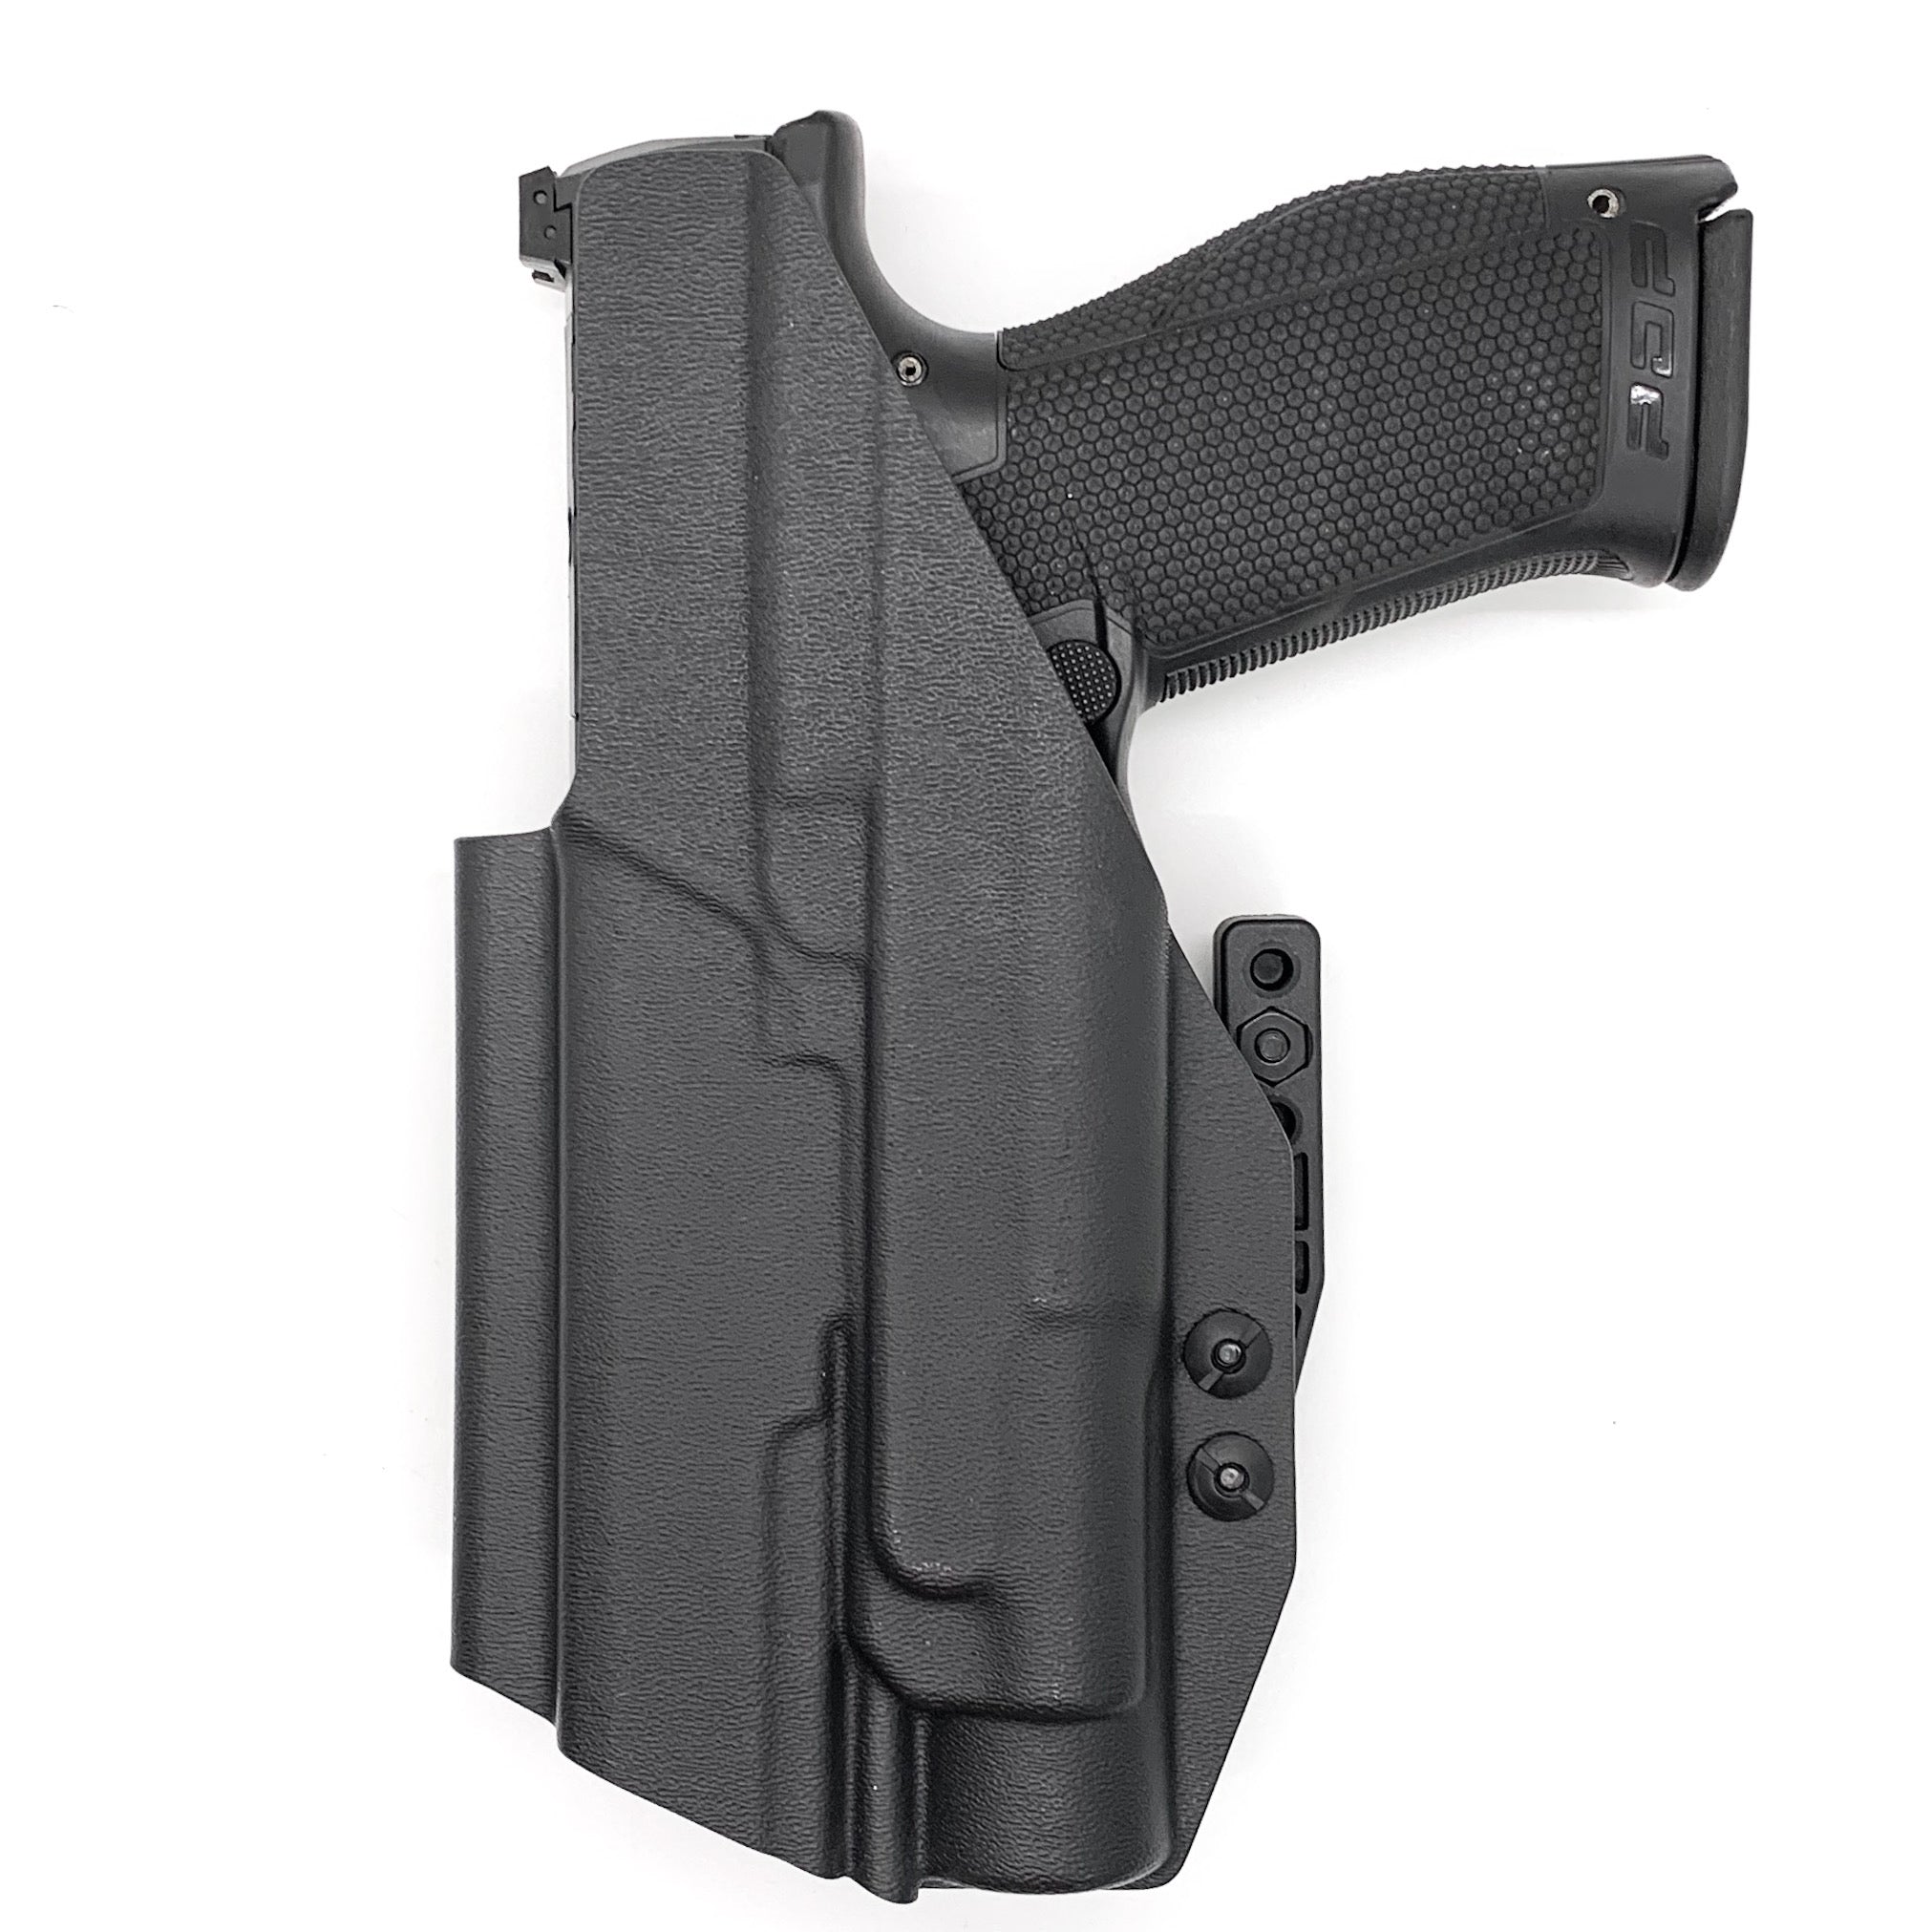 For the best concealed carry Inside Waistband IWB AIWB Holster designed to fit the Walther PDP 4.5" Full-Size pistol with the Streamlight TLR-1 or TLR-1HL mounted on the firearm, shop Four Brothers Holsters. Cut for red dot sight, full sweat guard, adjustable retention & open muzzle for threaded barrels & compensators